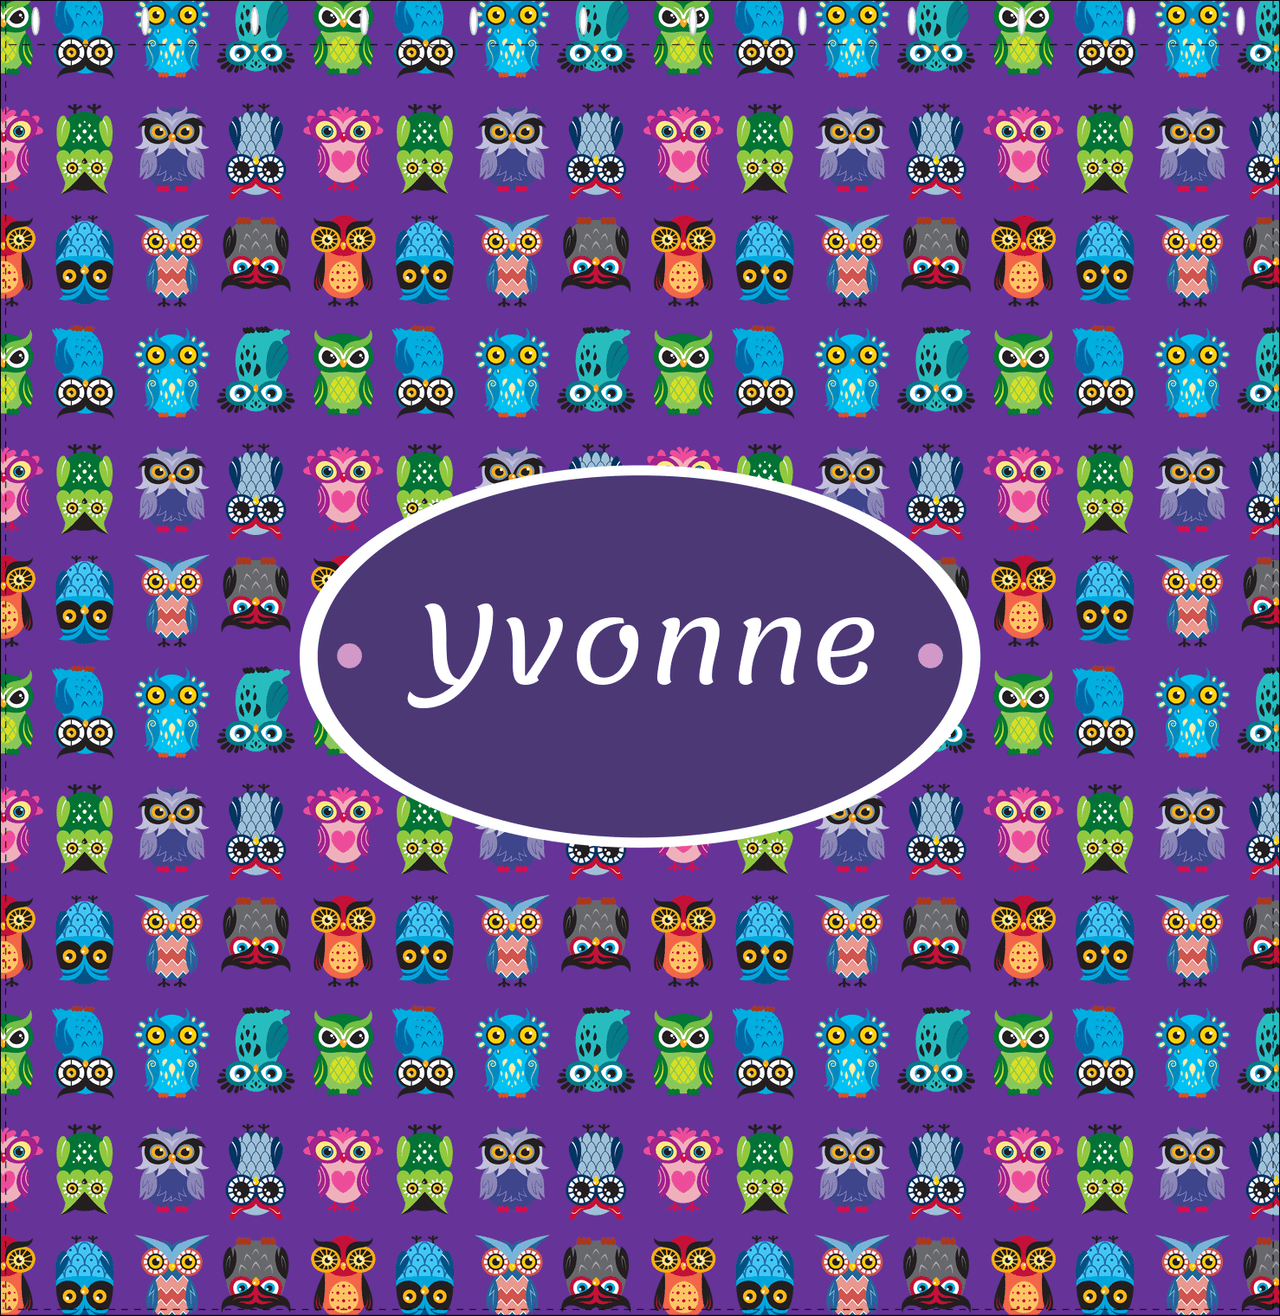 Personalized Owl Shower Curtain X - All Owls - Purple Background - Oval Nameplate - Decorate View